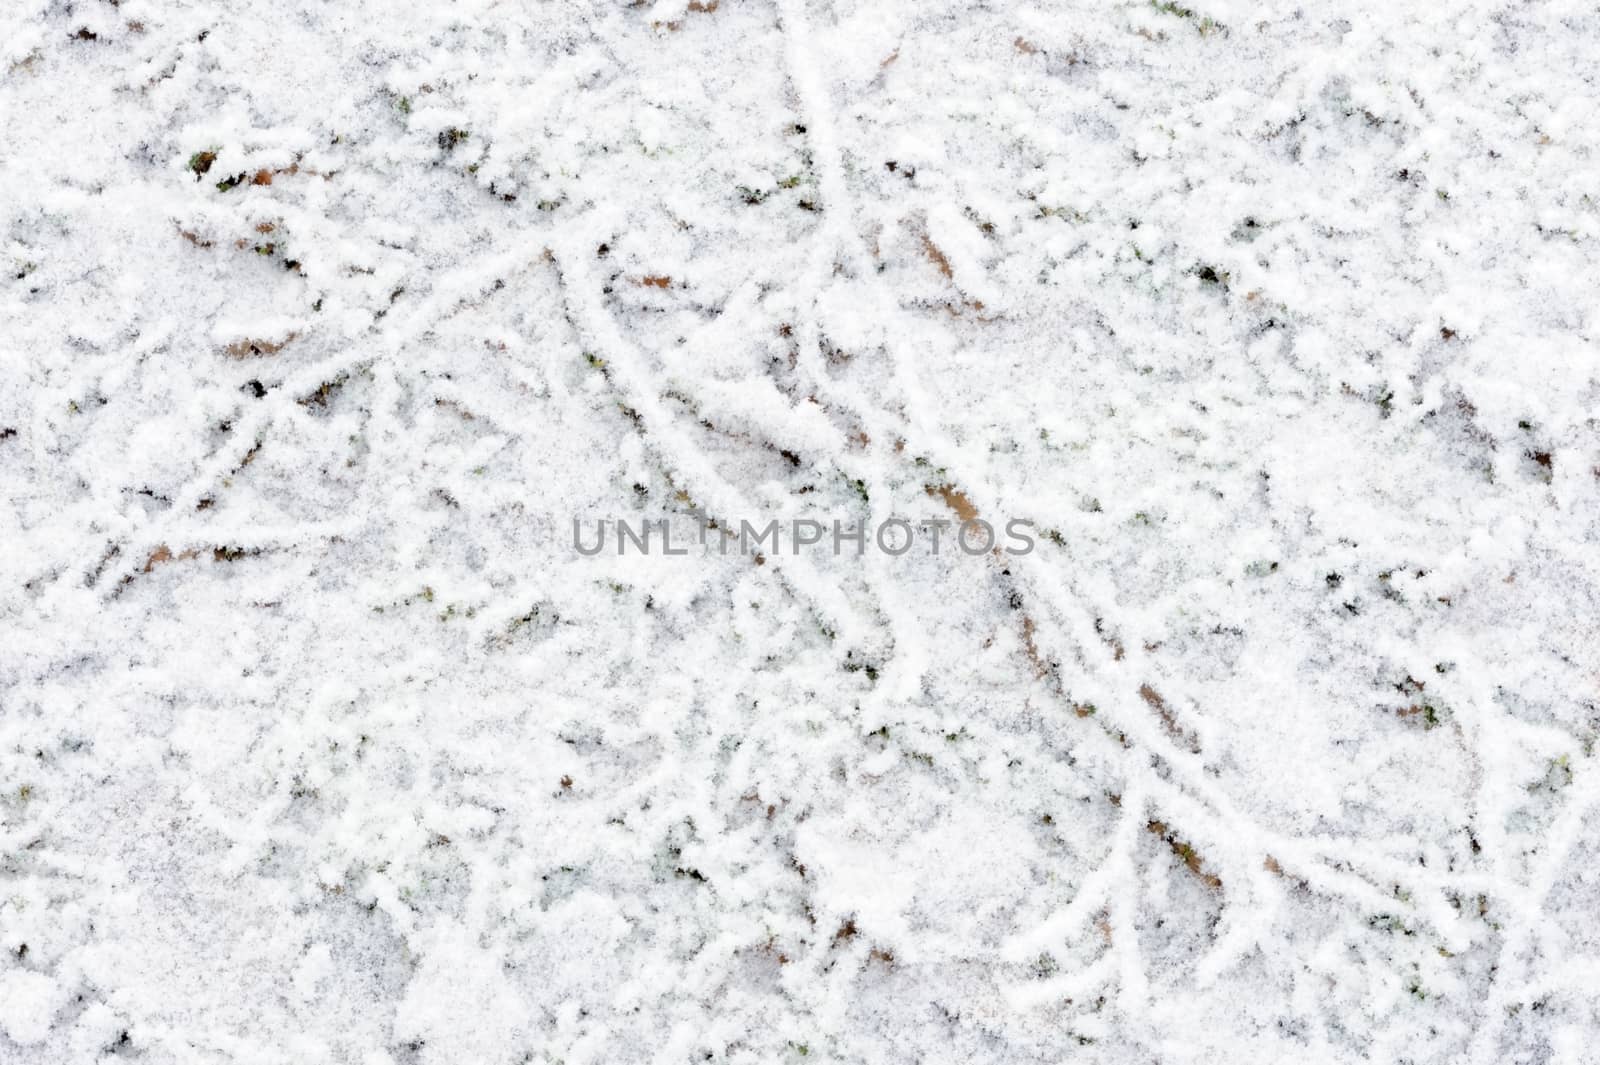 Forest floor covered in snow during winter